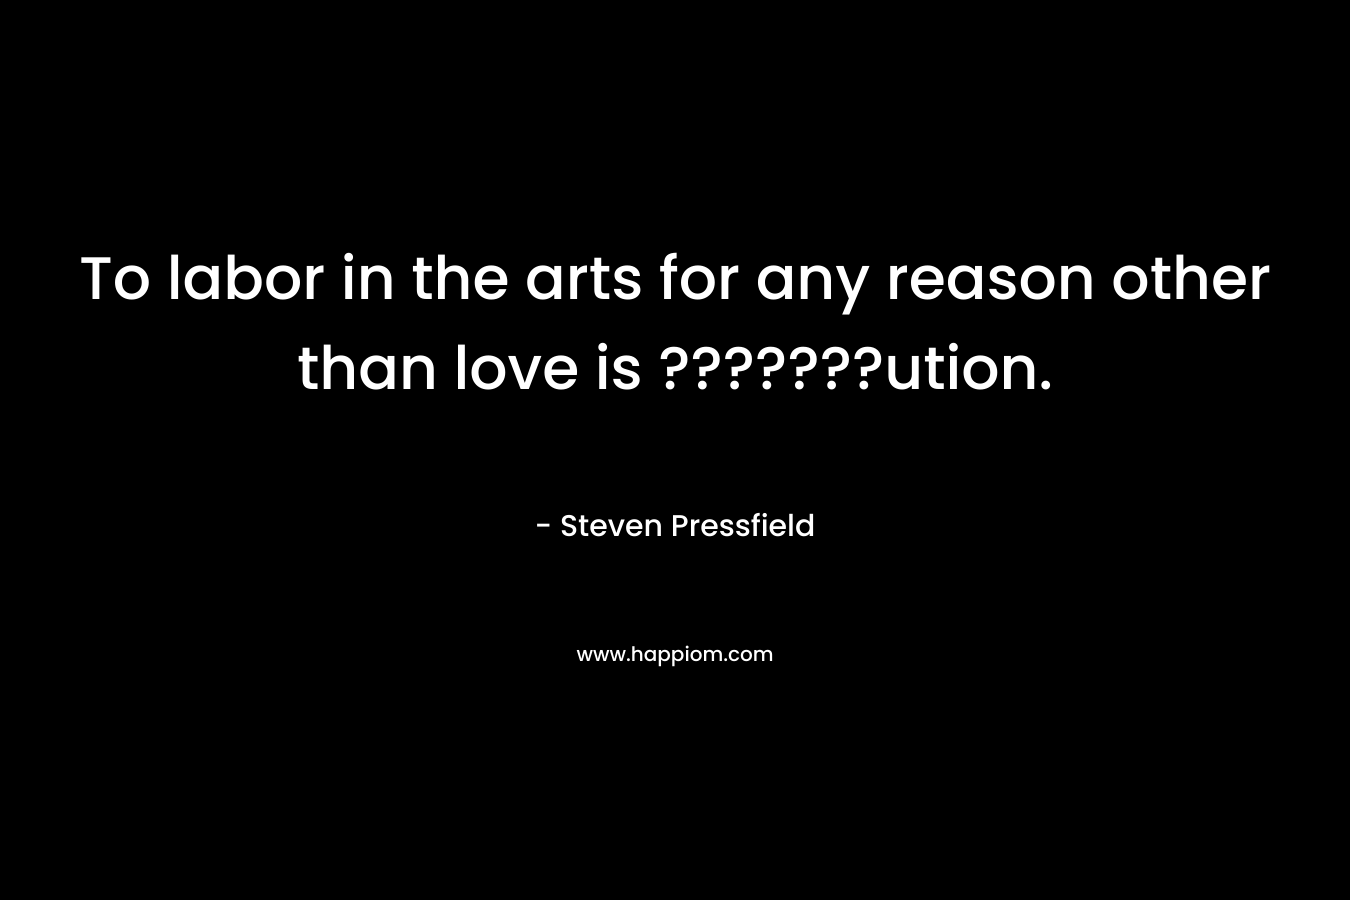 To labor in the arts for any reason other than love is ???????ution. – Steven Pressfield